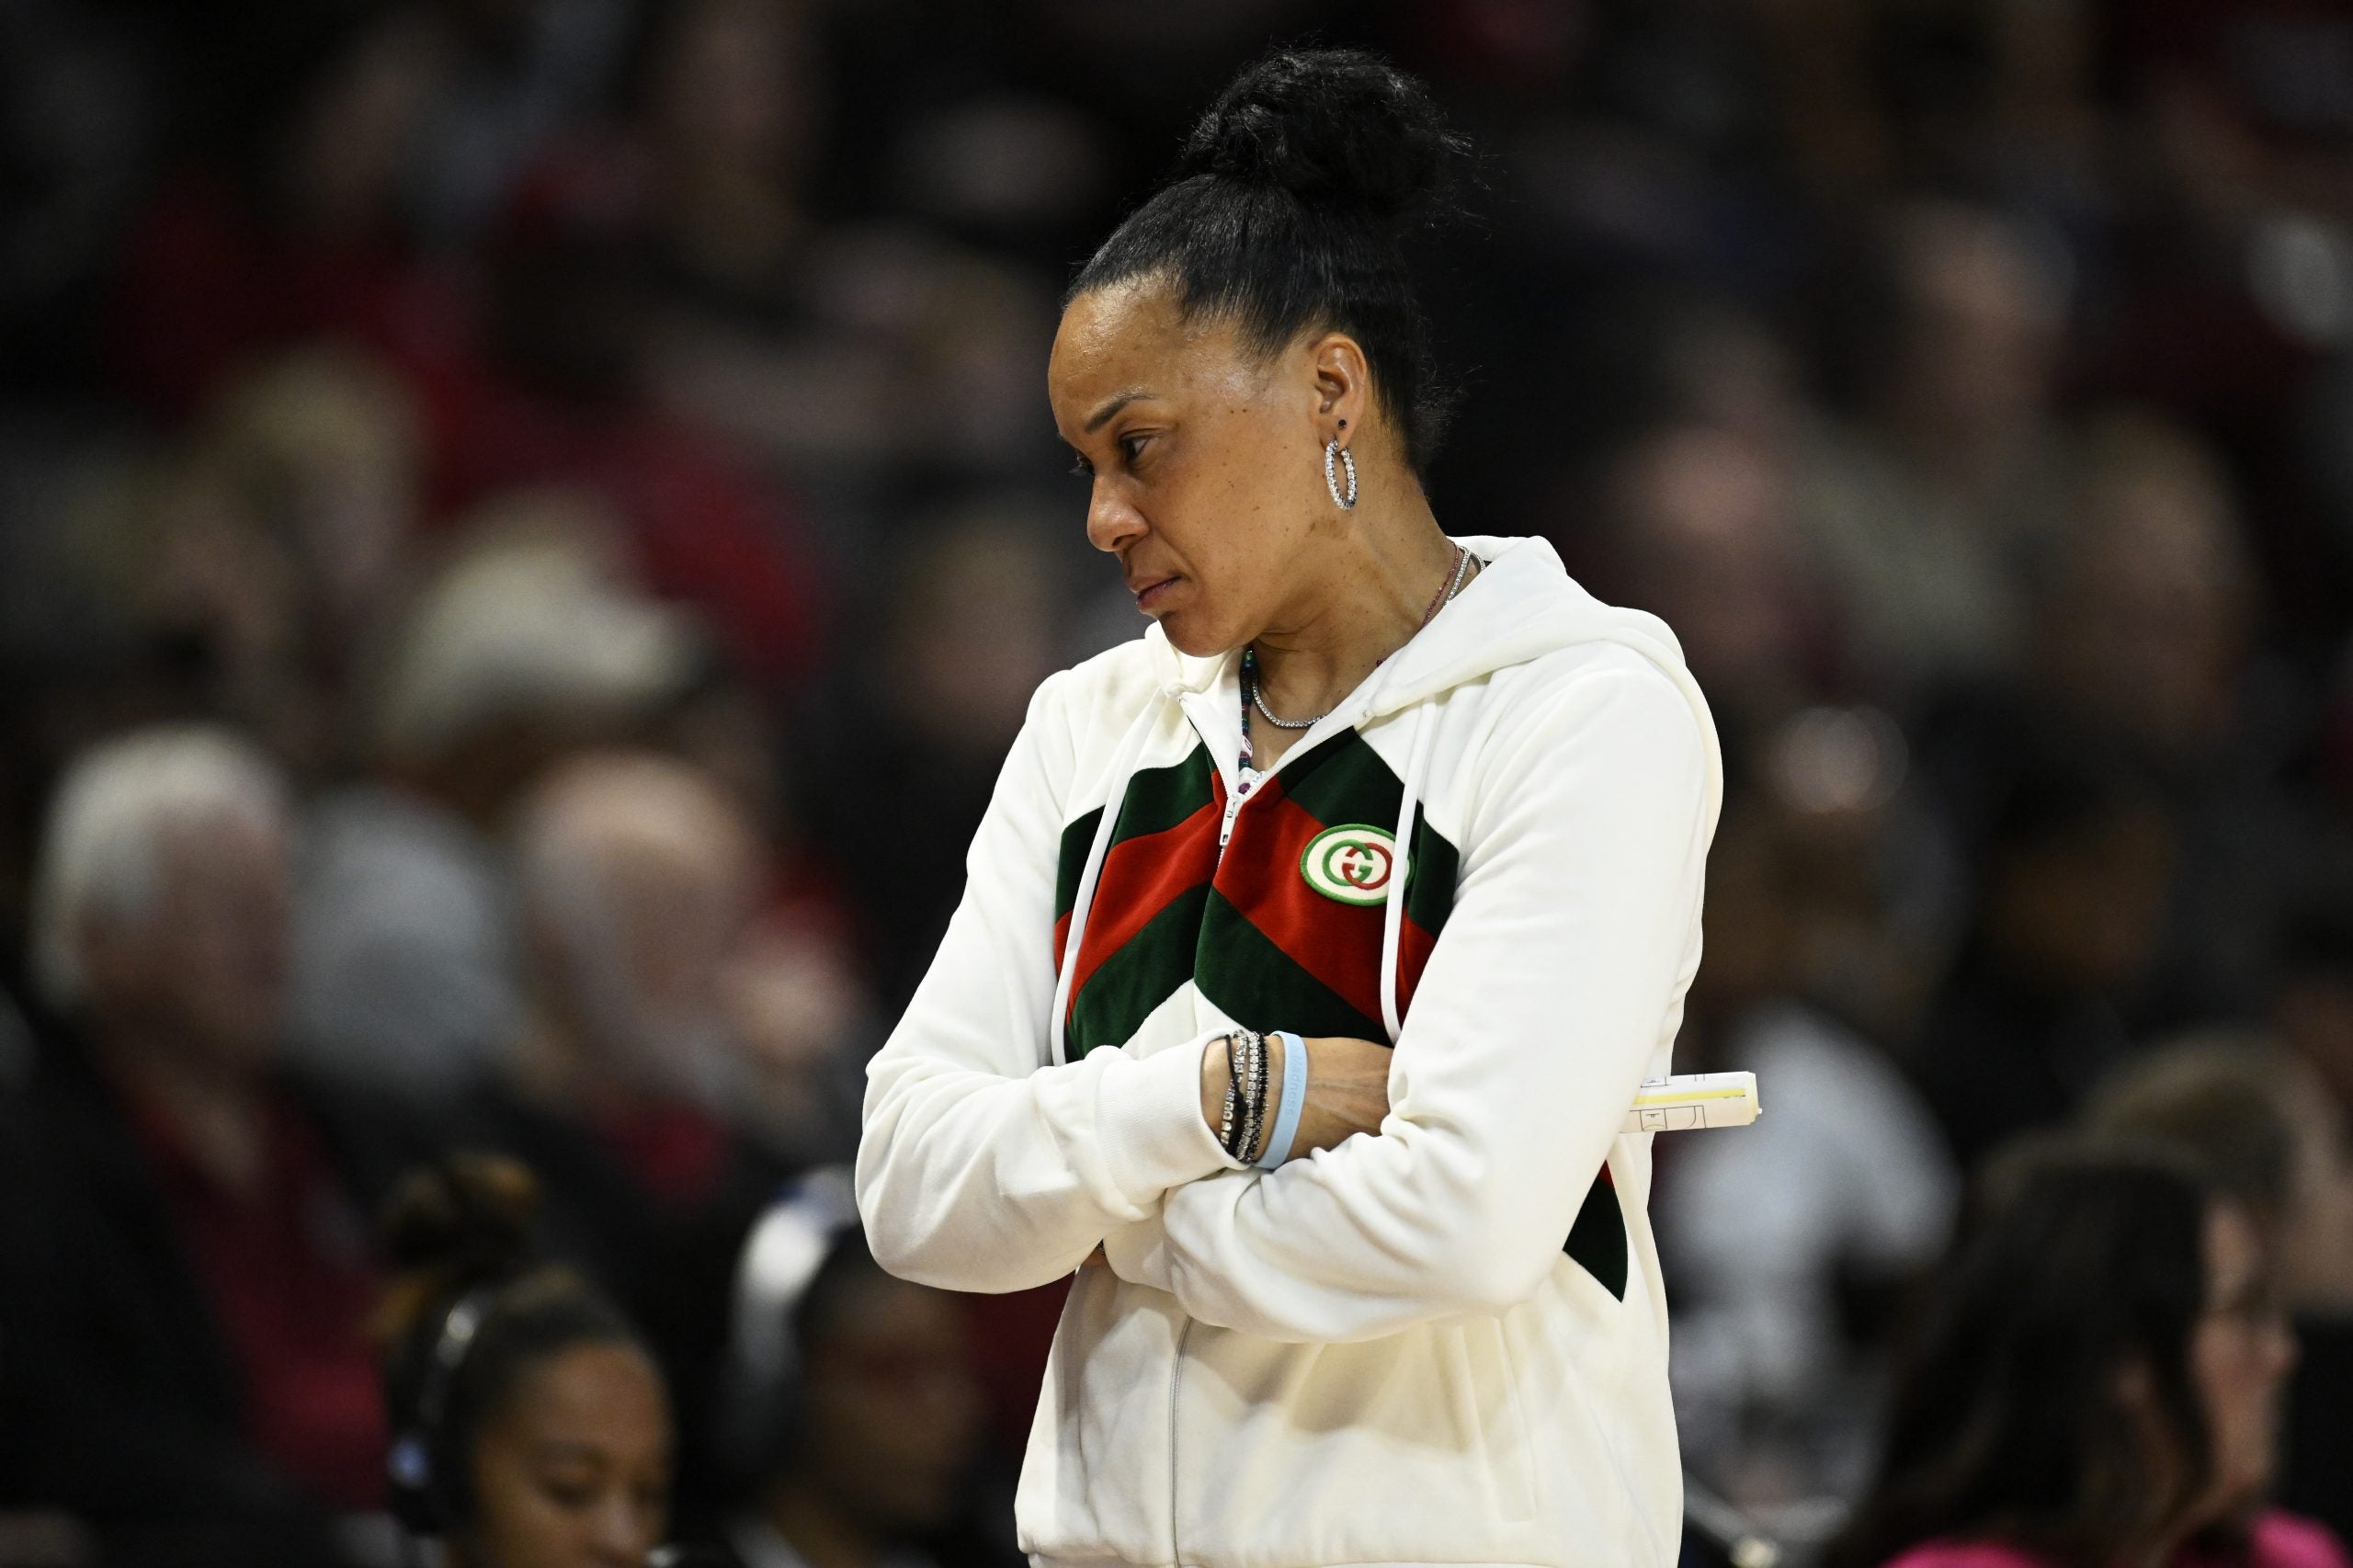 A Closer Look At The Designer Looks Of Dawn Staley The NCAA’s Flyest Coach 
